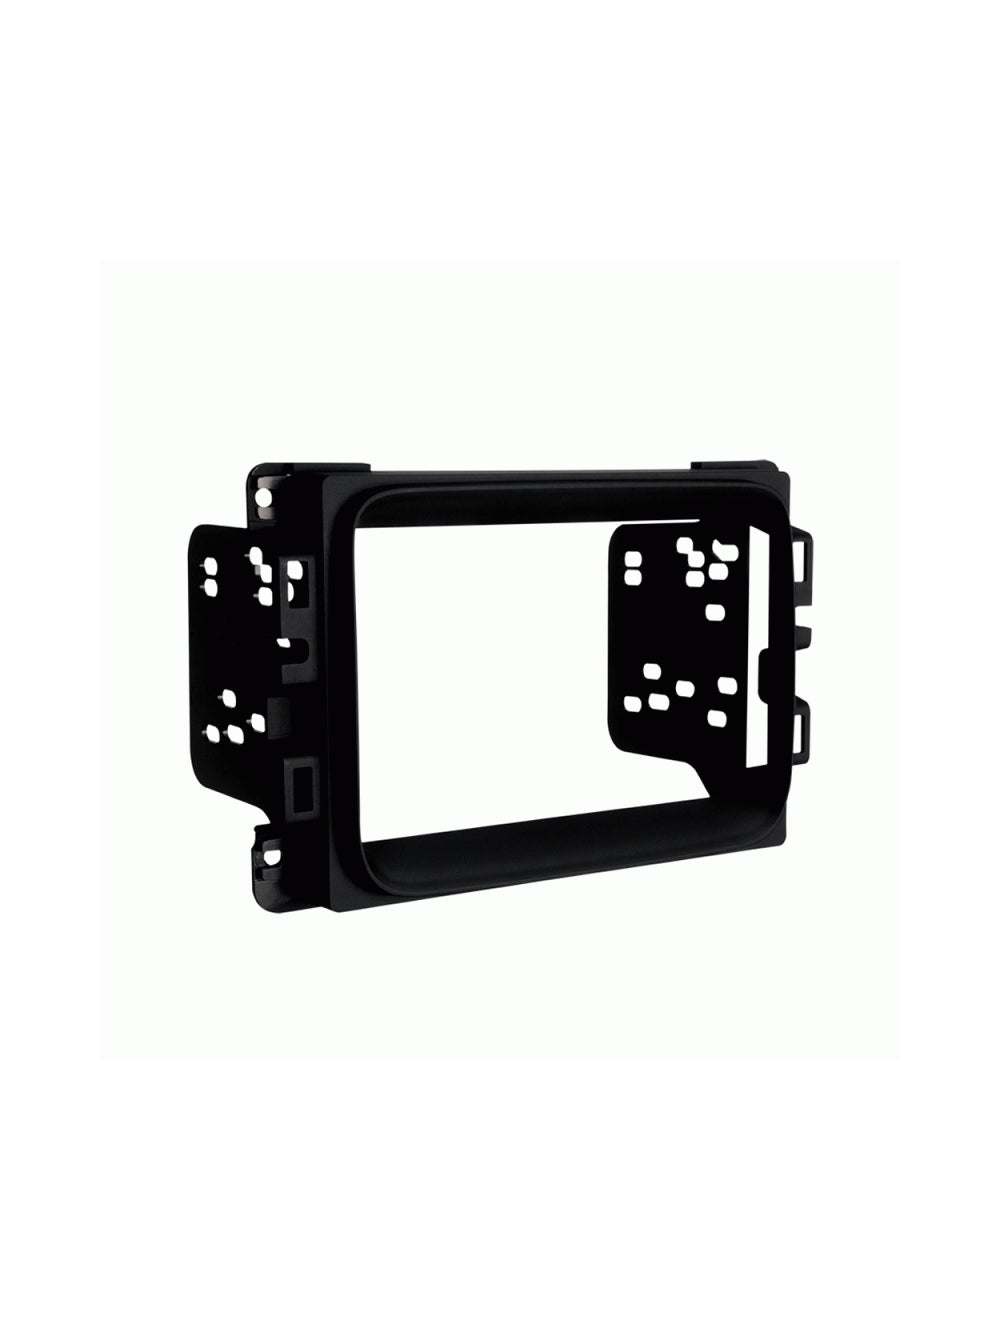 Metra 95-6518B Double Din Installation Kit for 2013-Up Chrysler/Jeep/Ram